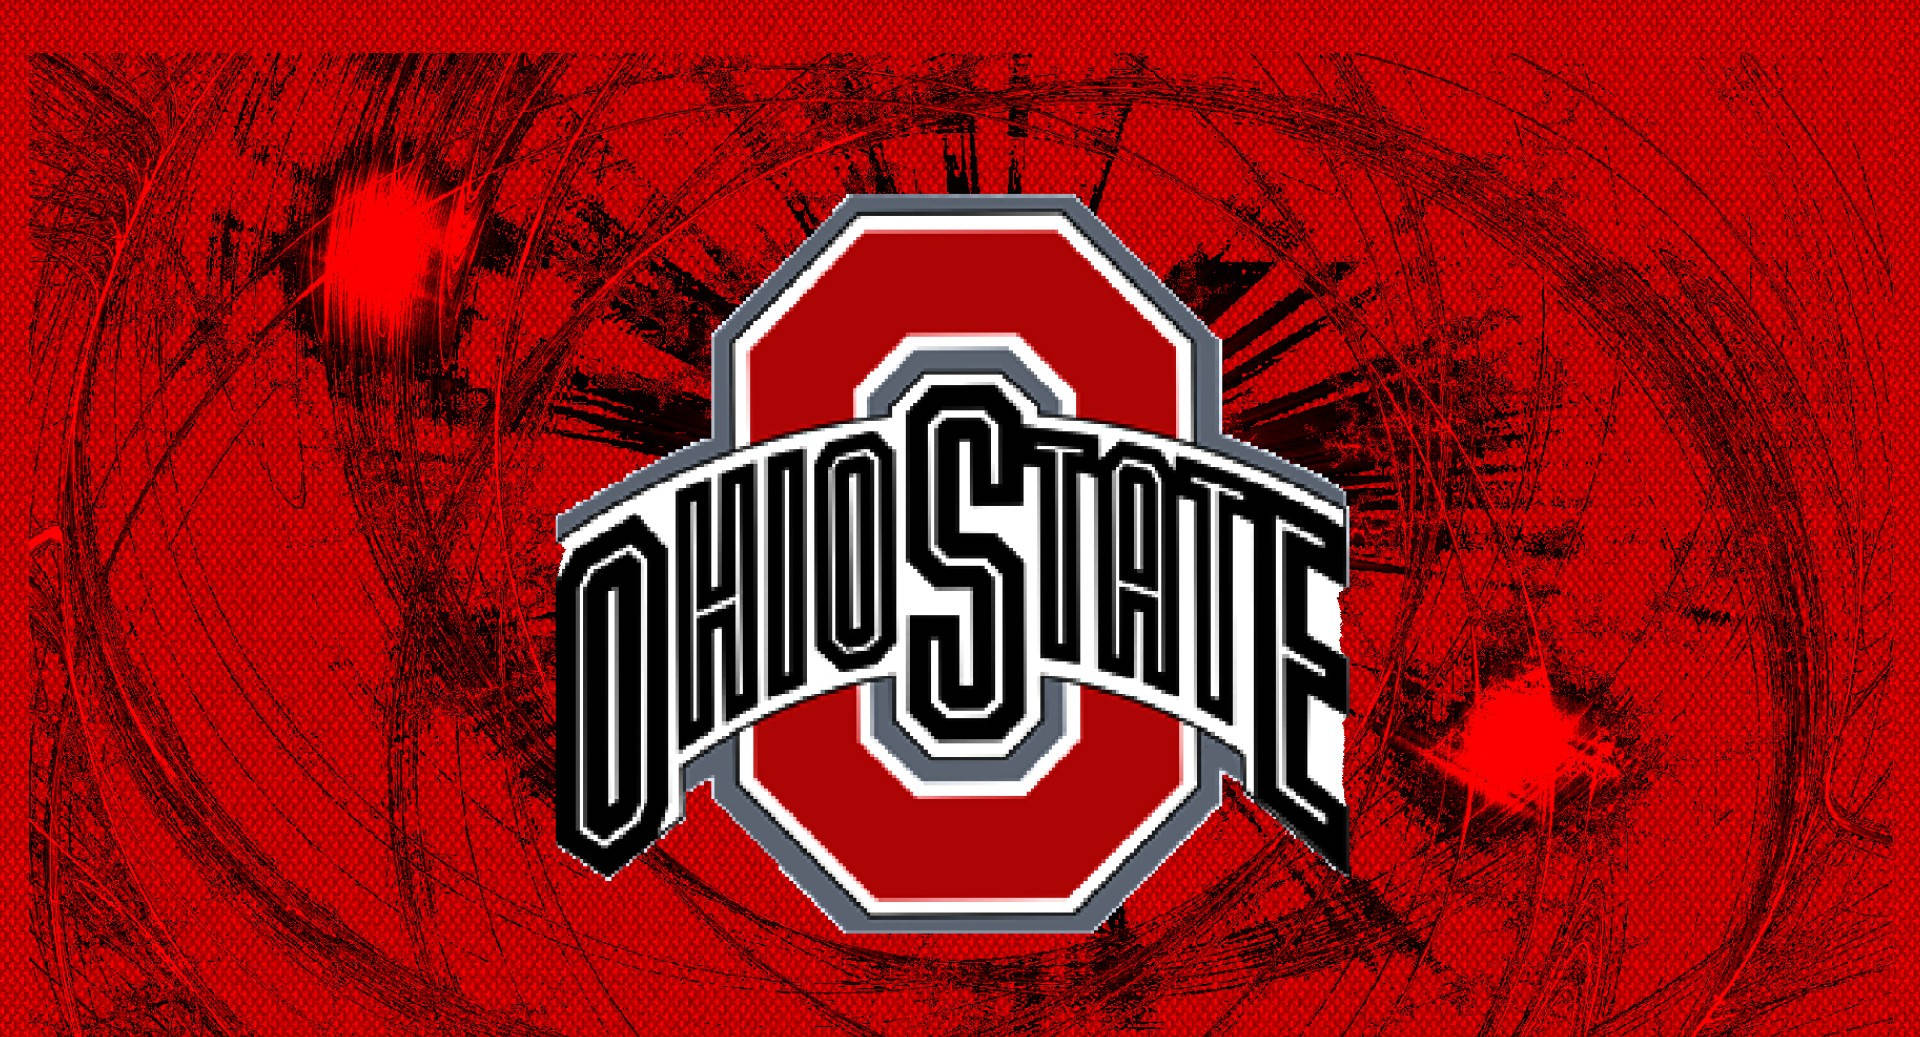 Ohio State University Scratched Red Background